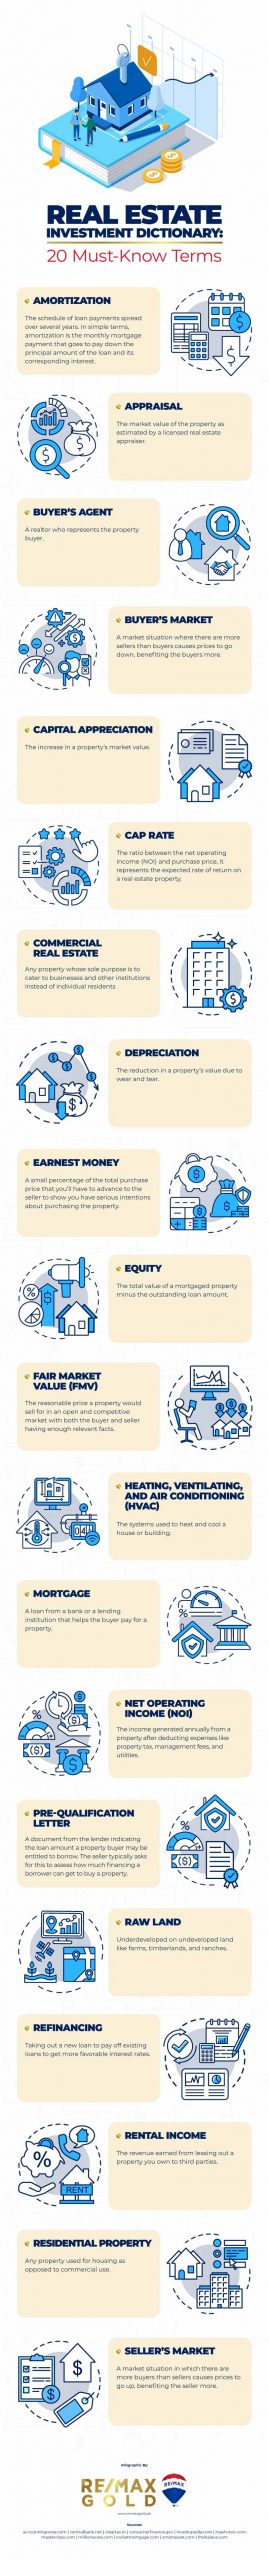 real estate investment terminology infographic